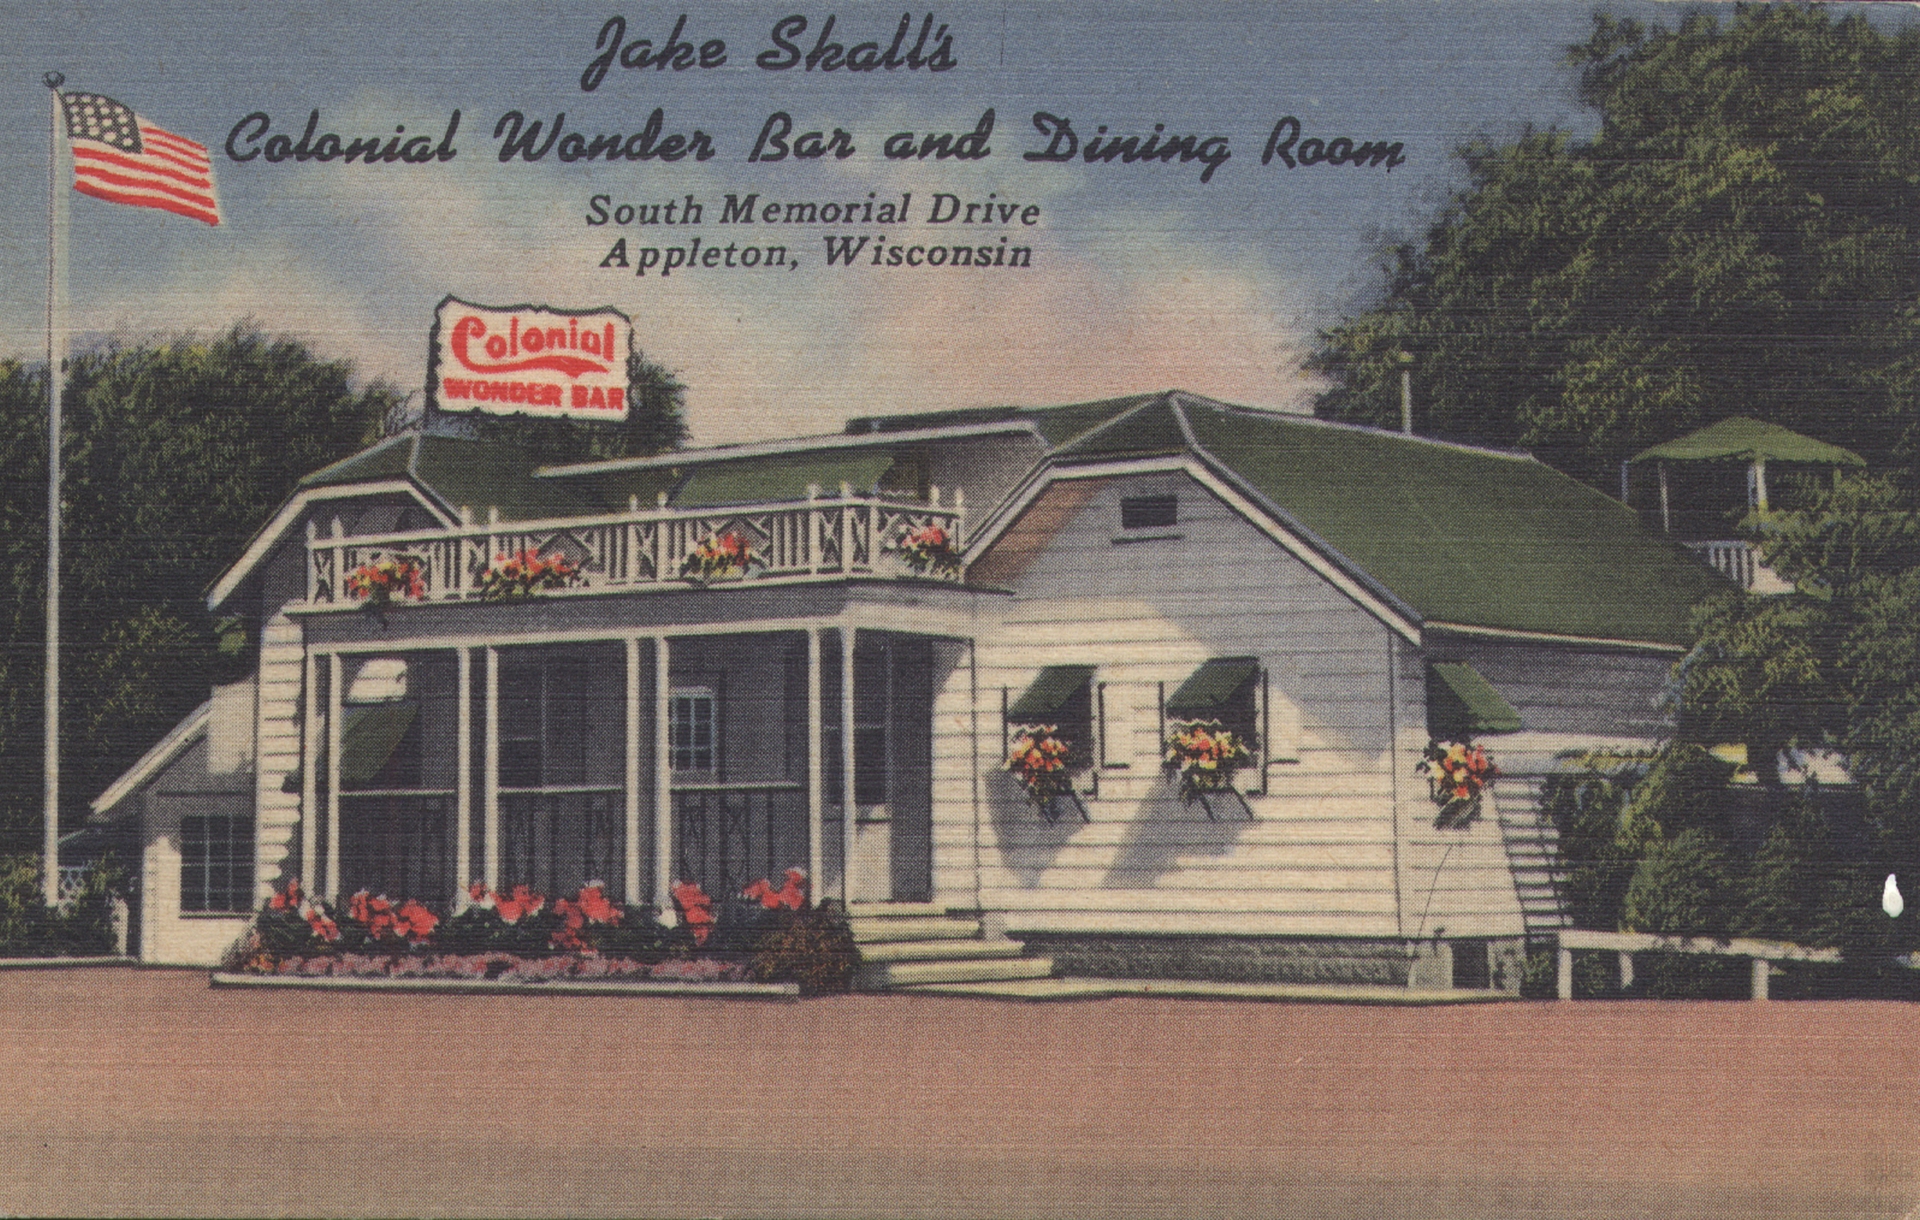 At Jake Skall’s Colonial Wonderbar, Black people were required to order from the back door on the outside of the building.